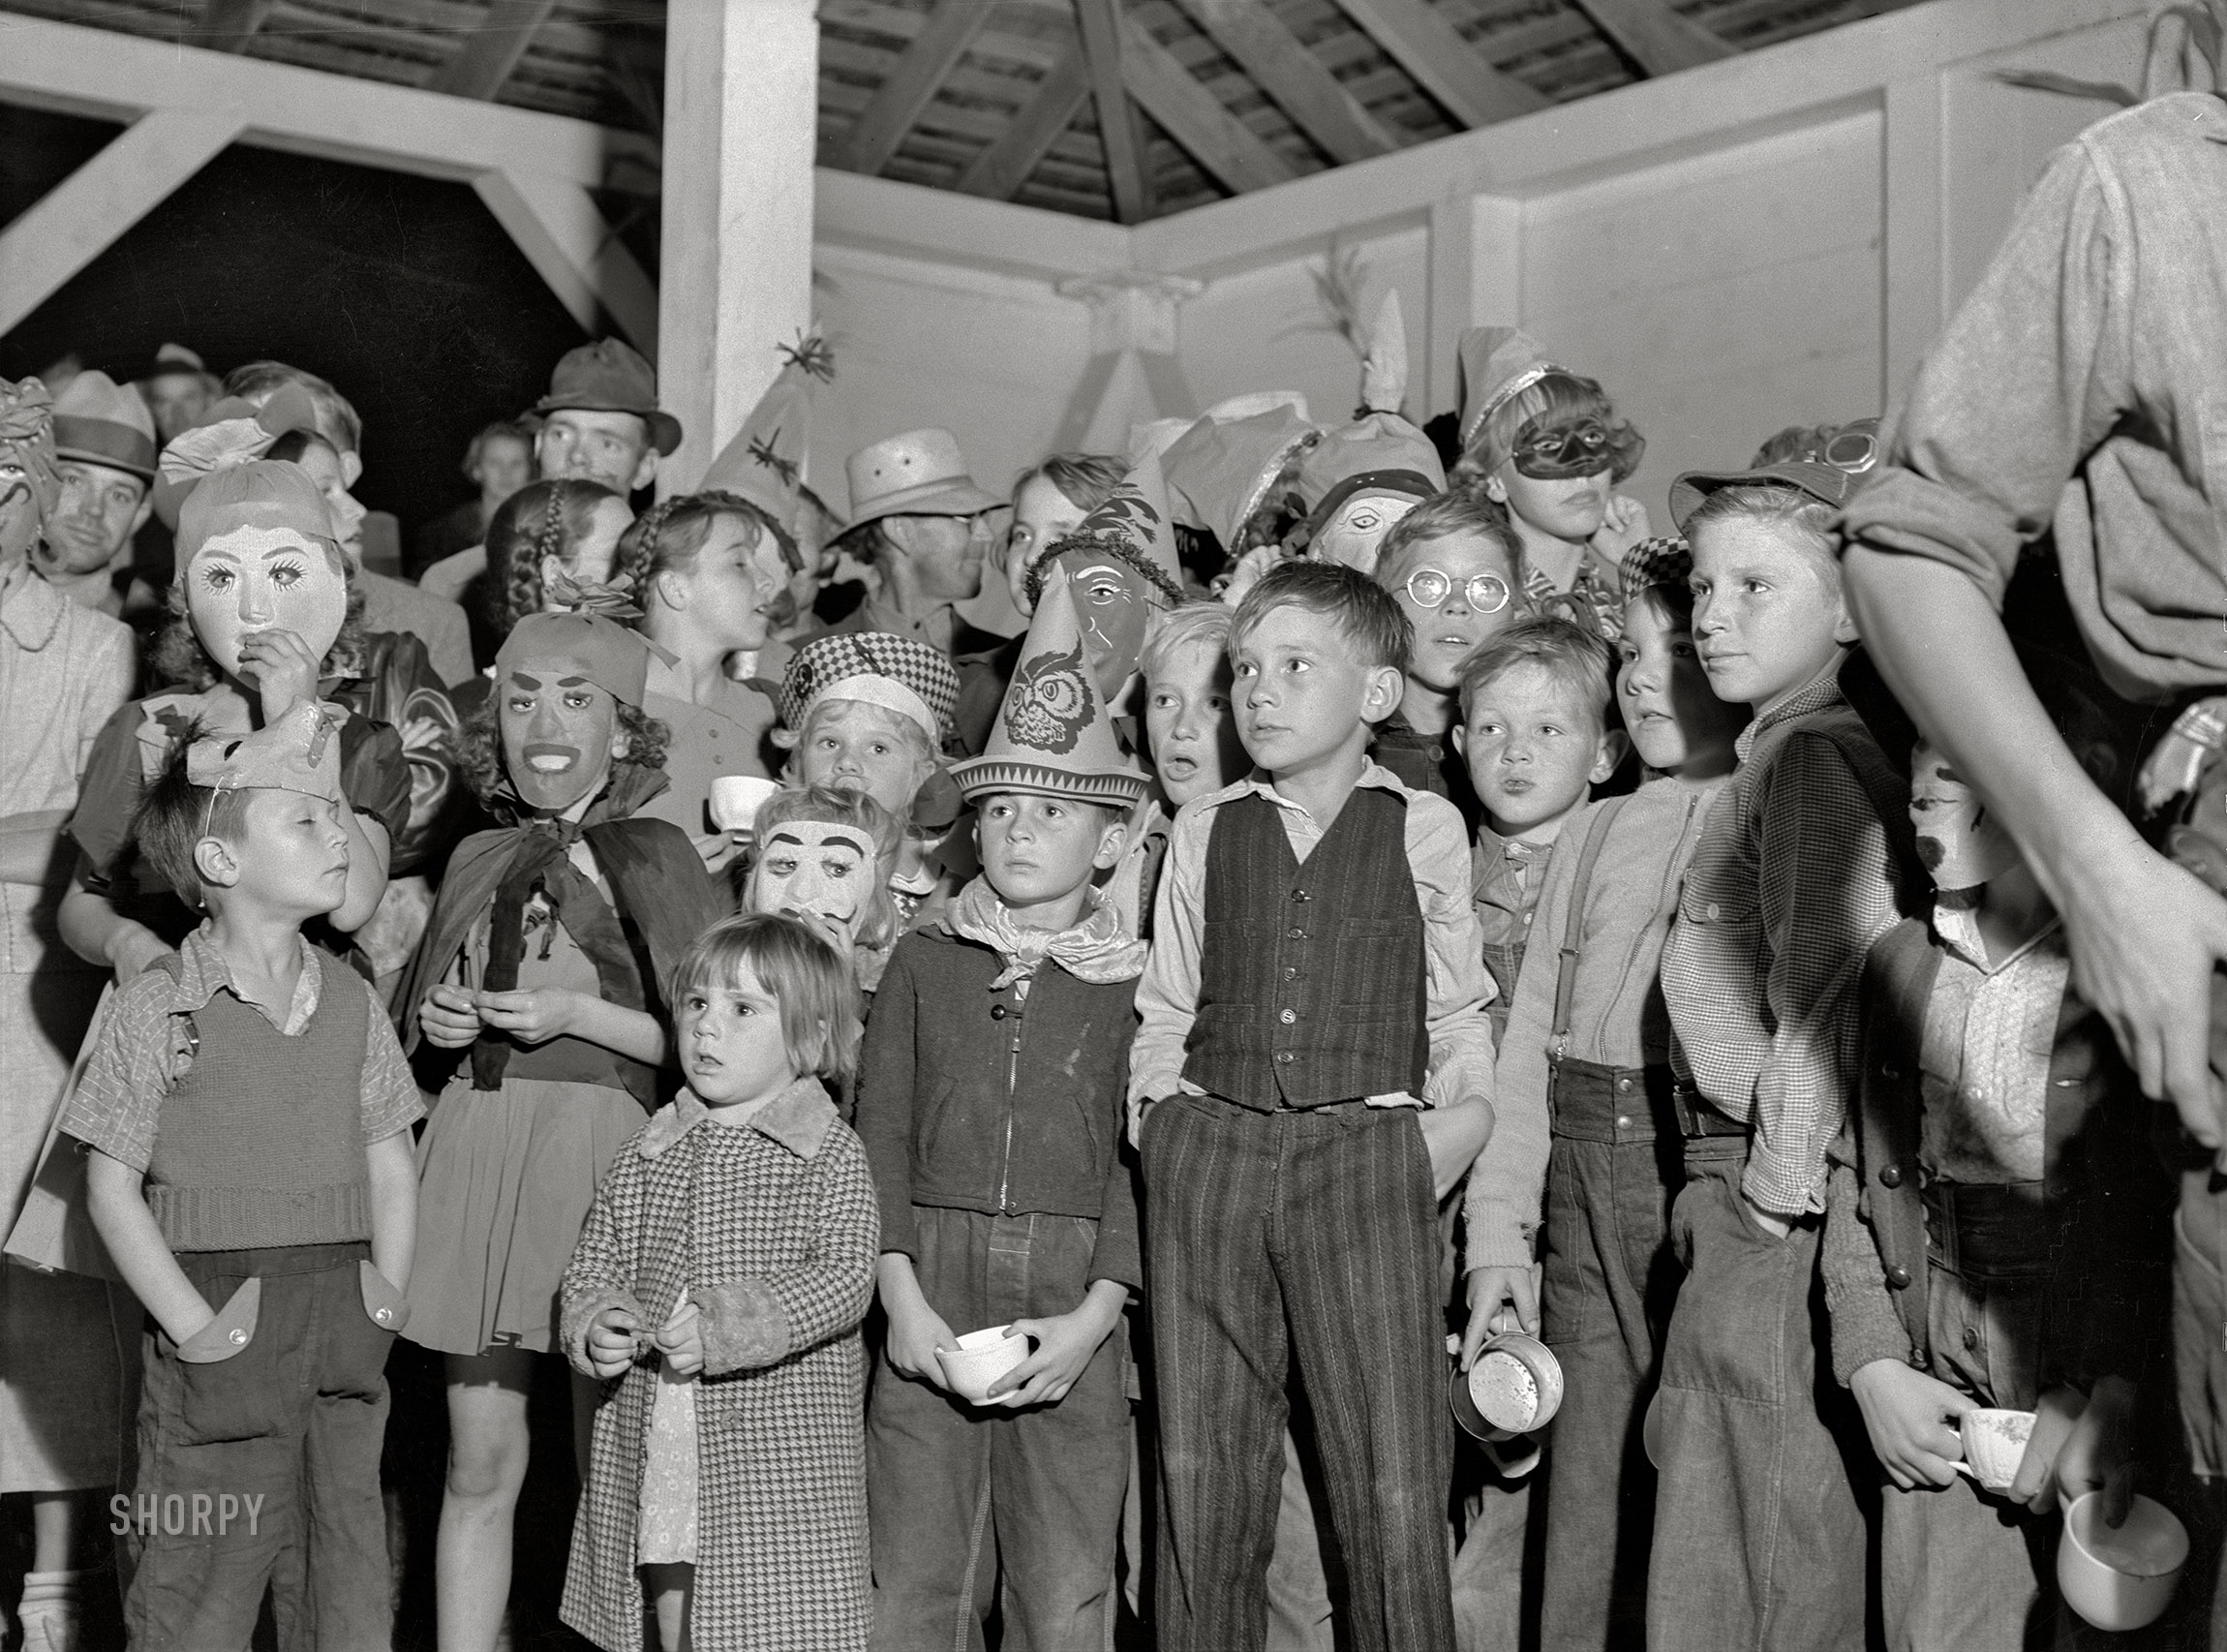 October 1938. "Shafter, Kern County, California. Halloween party at FSA camp for migratory agricultural workers." Acetate negative by Dorothea Lange for the Farm Security Administration, and Happy Halloween from Shorpy. View full size.